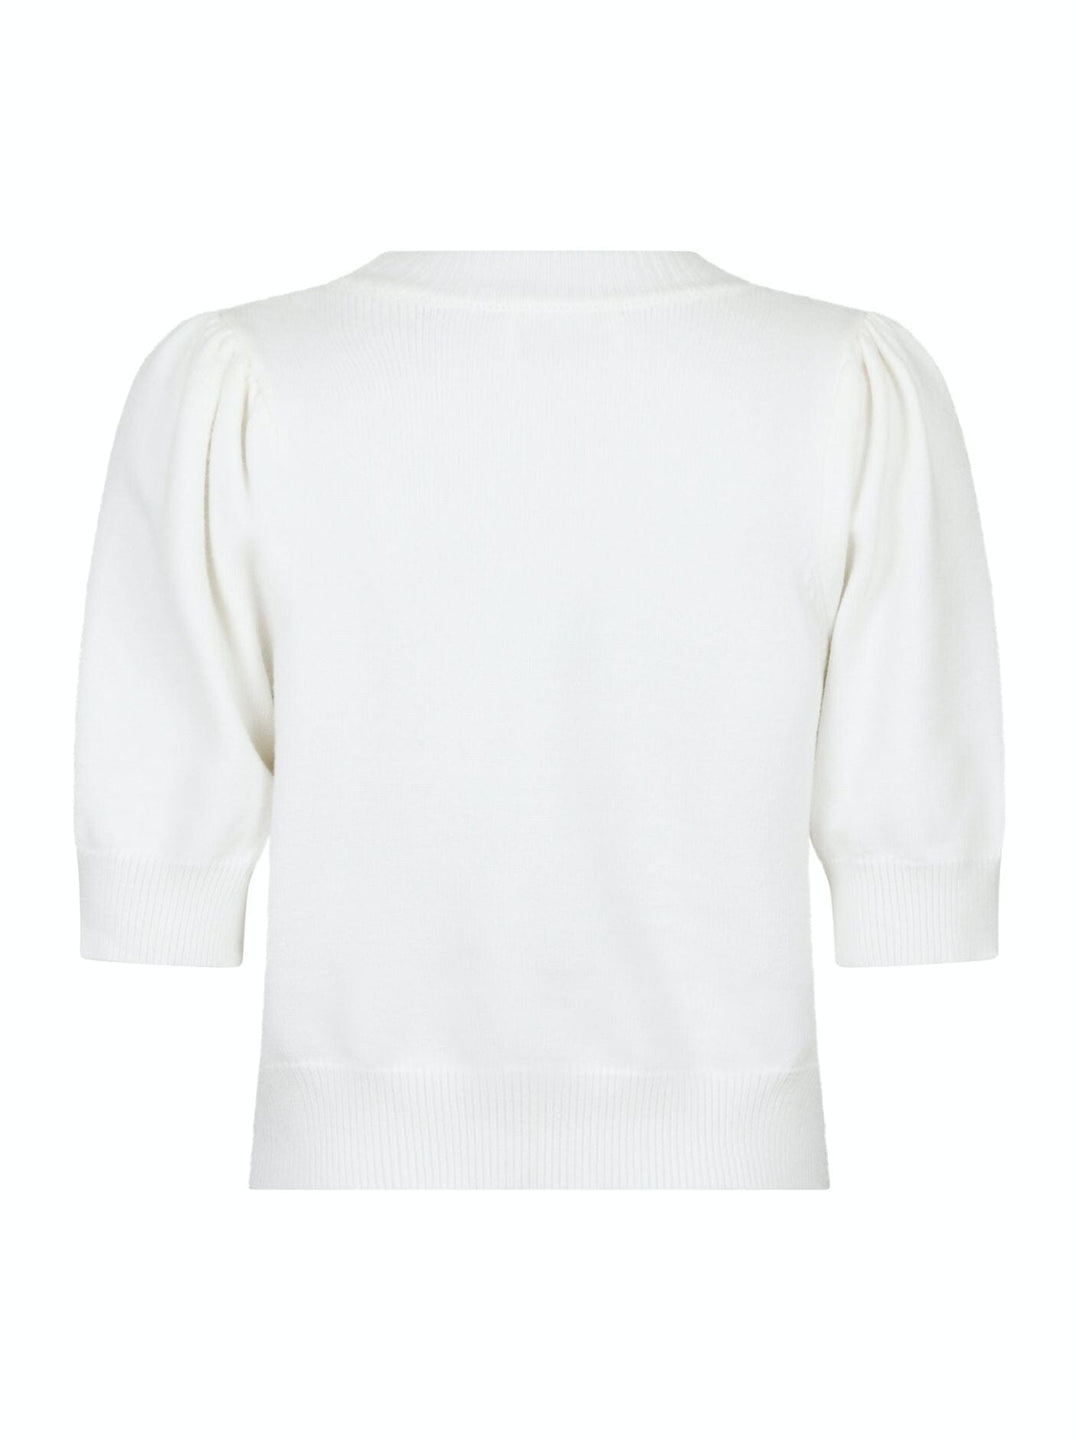 Neo Noir - Maia Soft Pearl Knit Tee - Off White T-shirts 